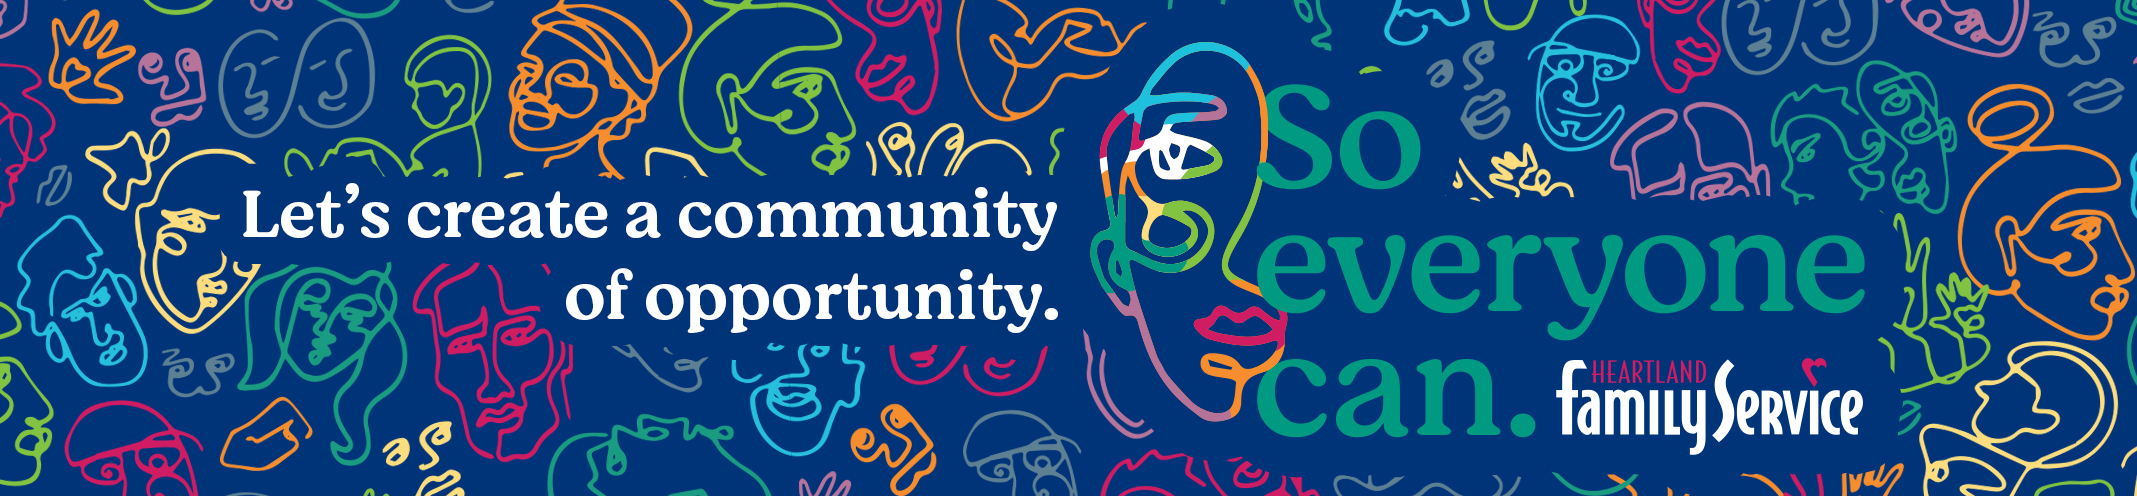 Let's create a community of opportunity. So Everyone Can.